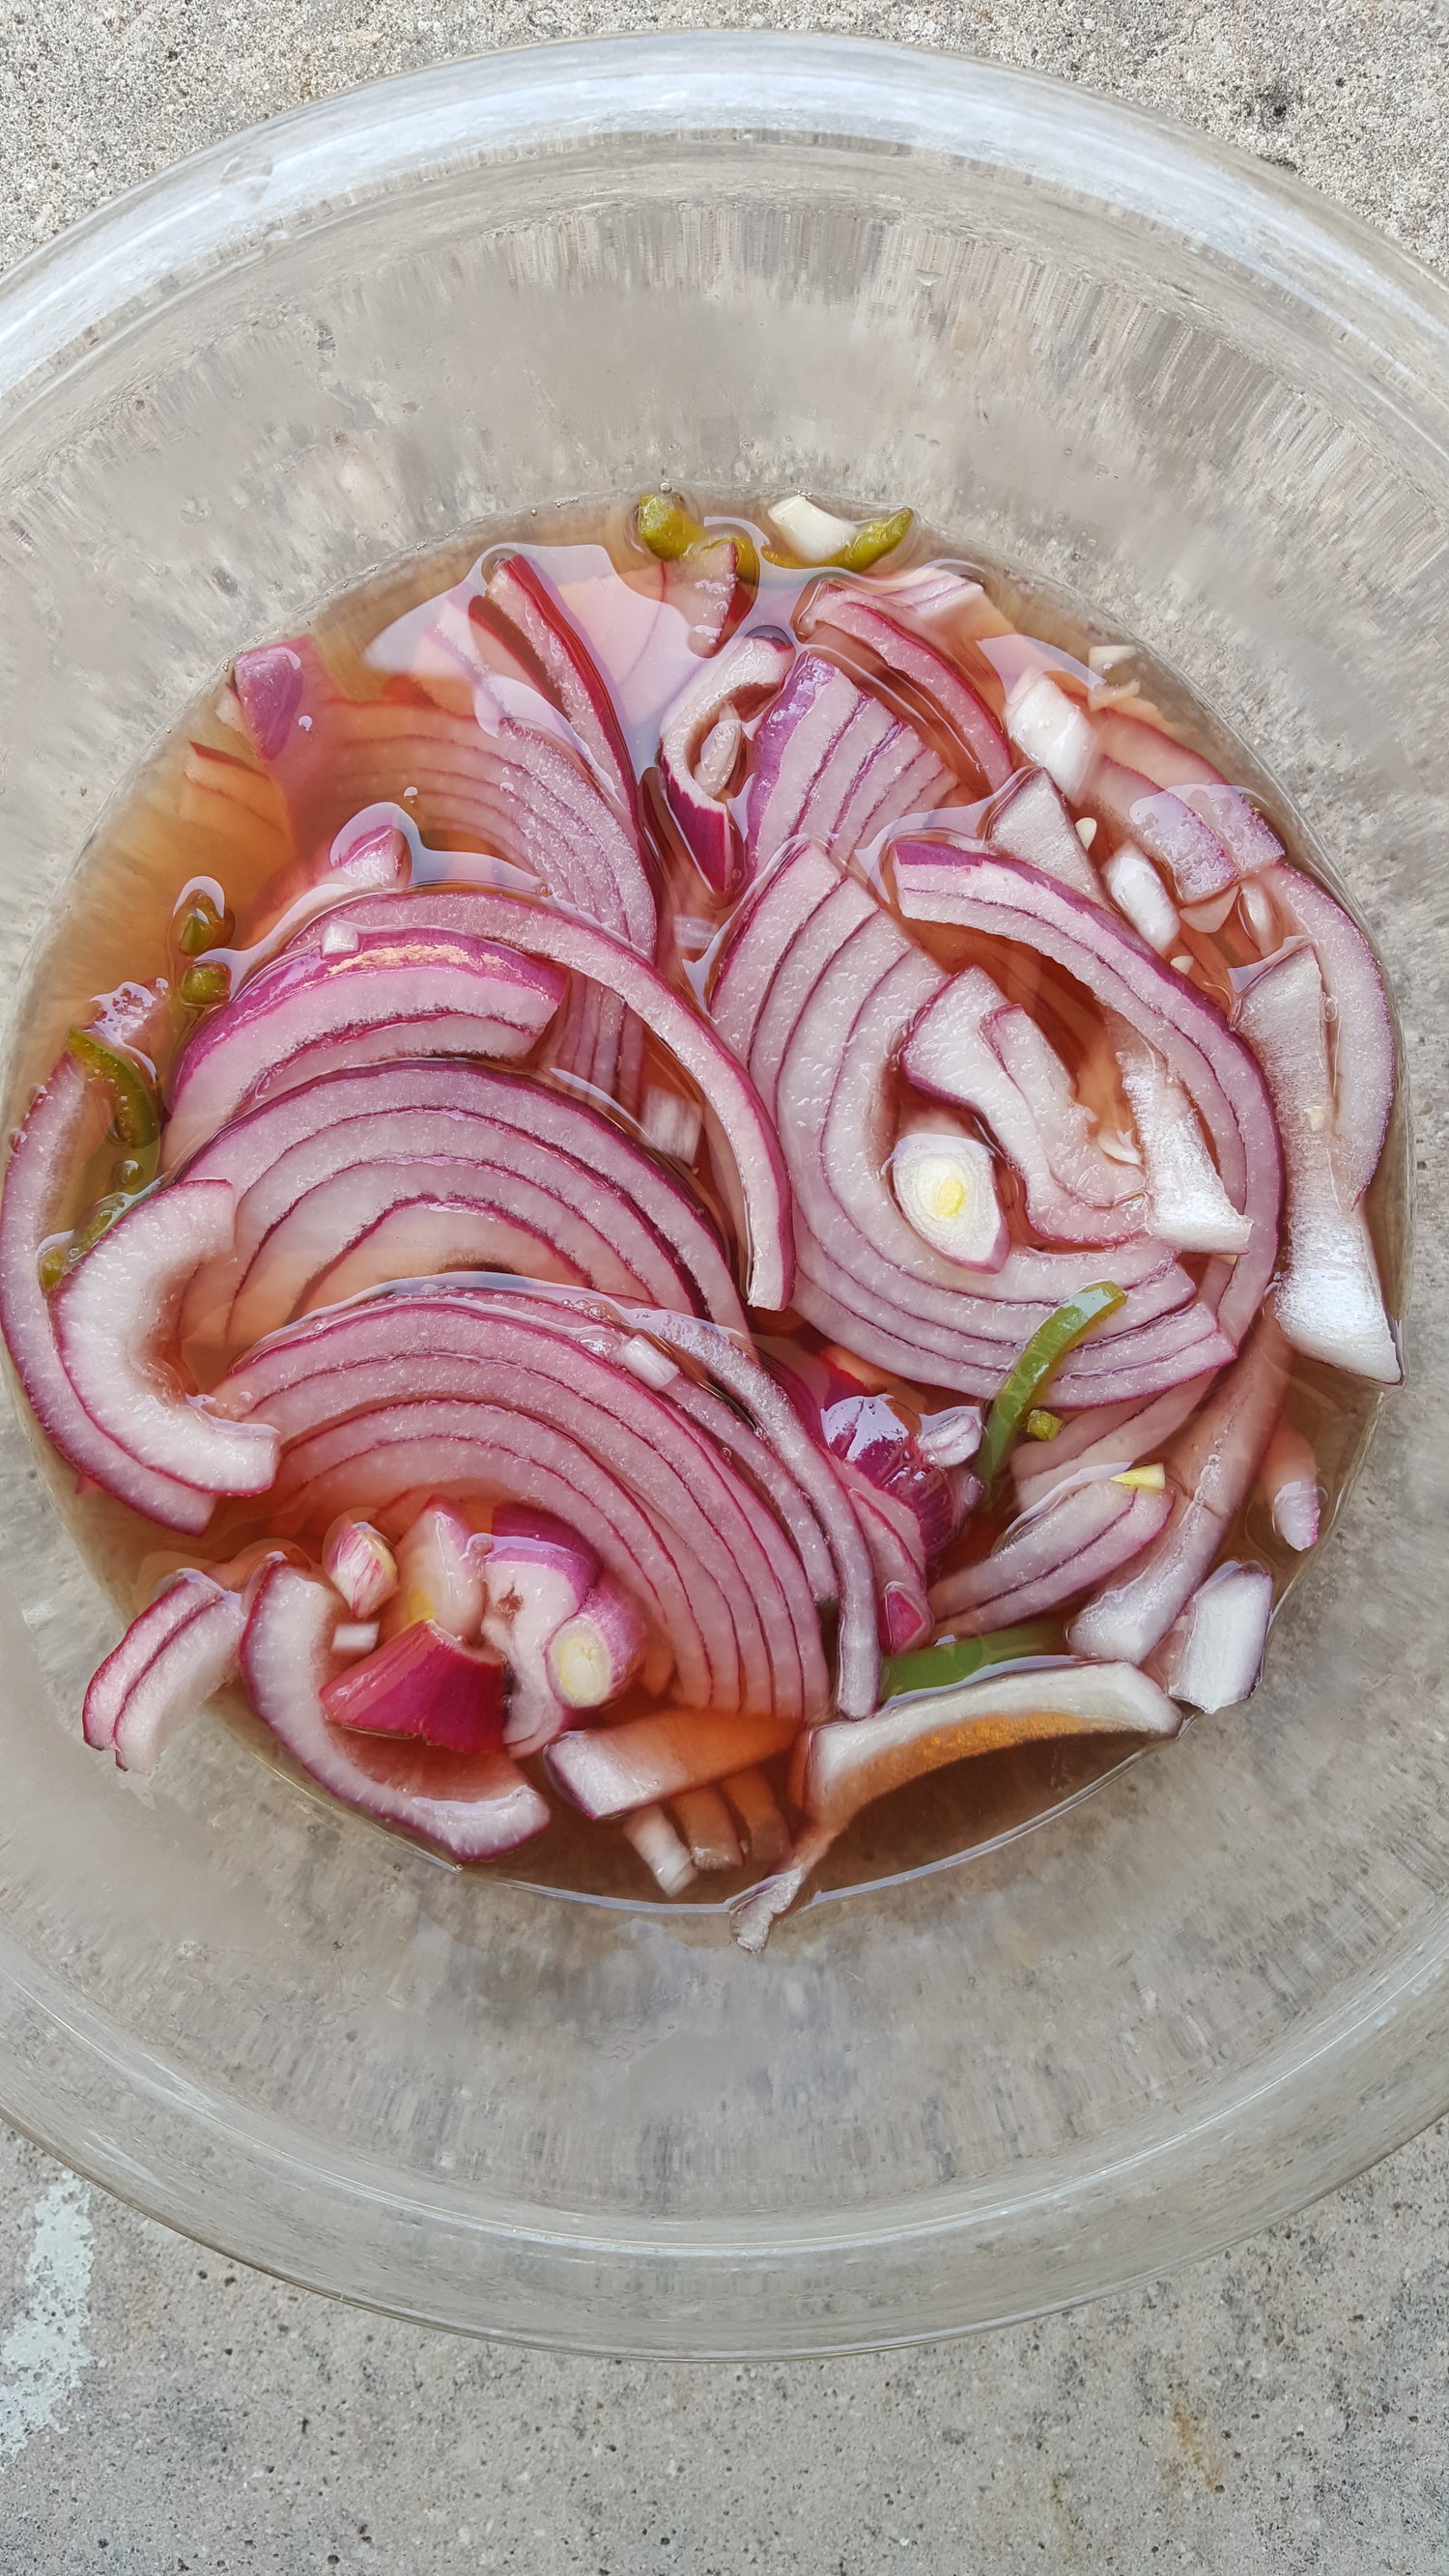 Pickling Red Onions for my Bean Burgers this week!